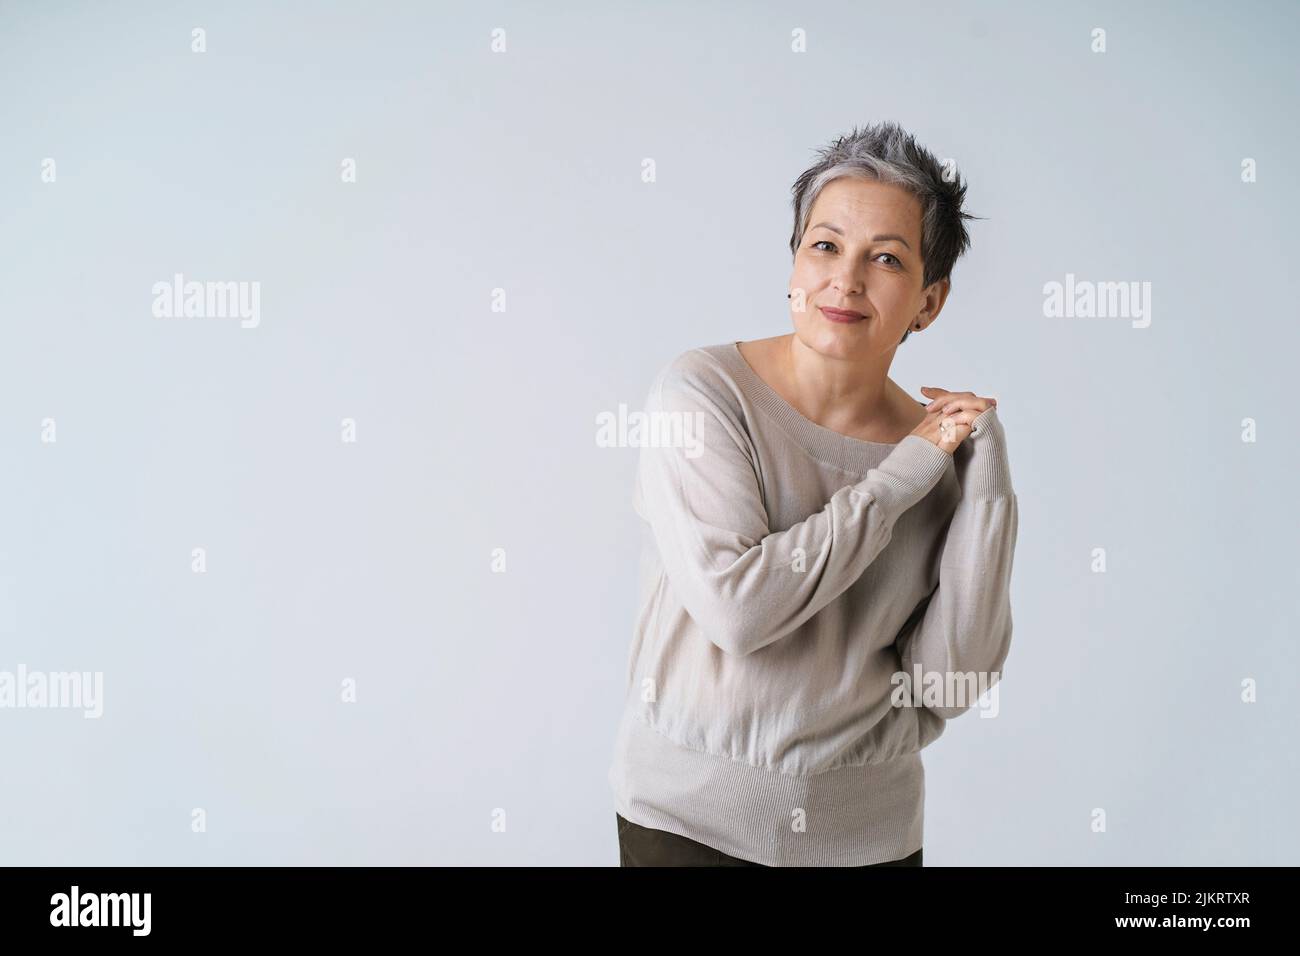 Smiling mature grey short hair woman posing with hands folded at her shoulder looking at camera wearing white blouse, copy space isolated on white background. Healthcare, aged beauty concept.  Stock Photo